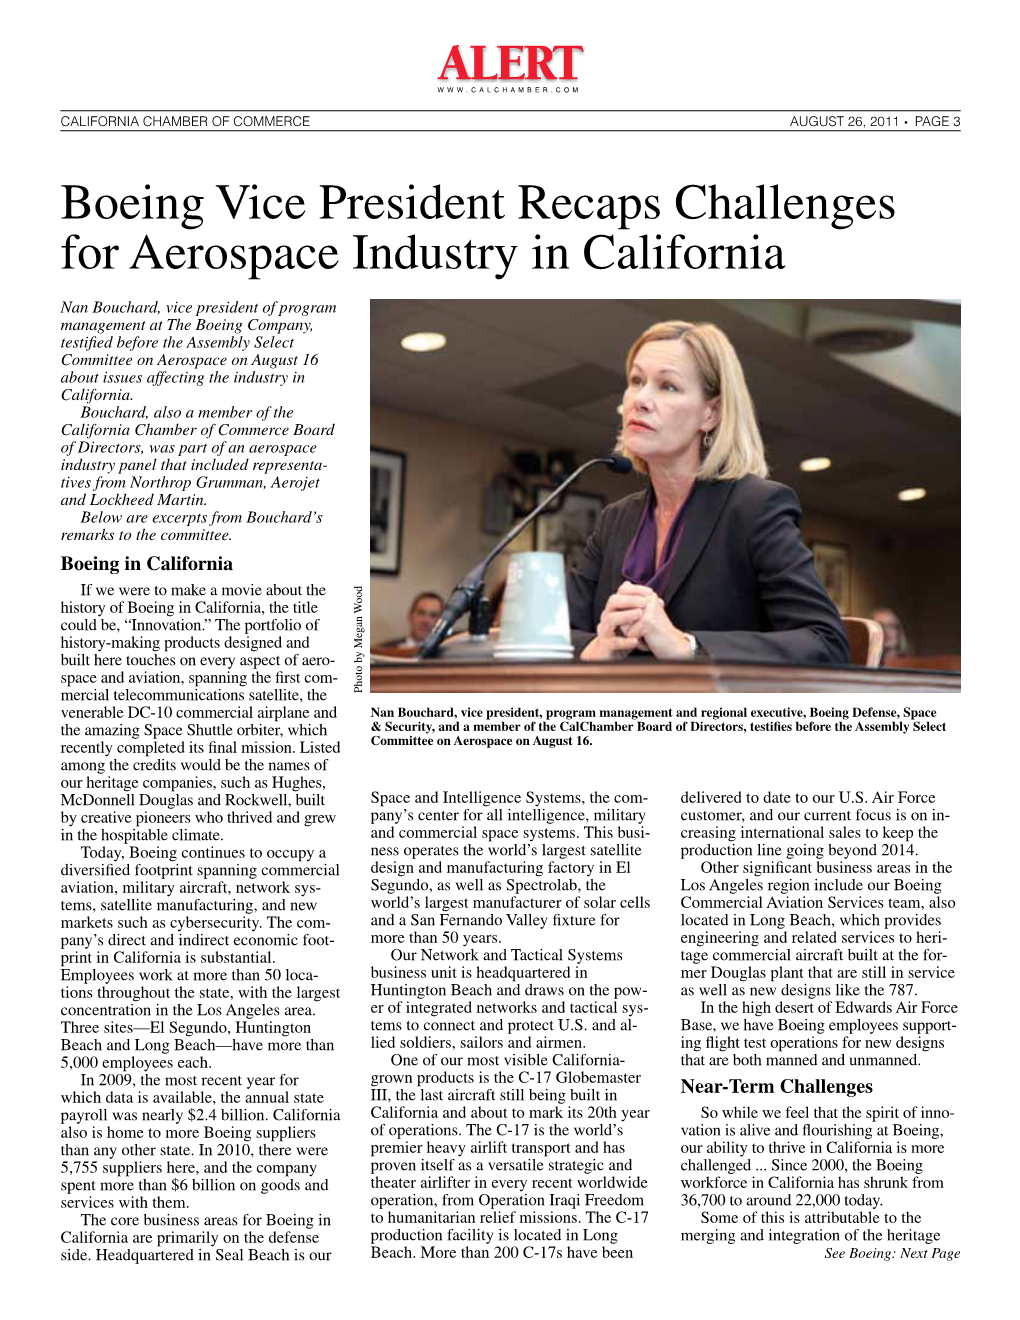 Boeing Vice President Recaps Challenges for Aerospace Industry in California